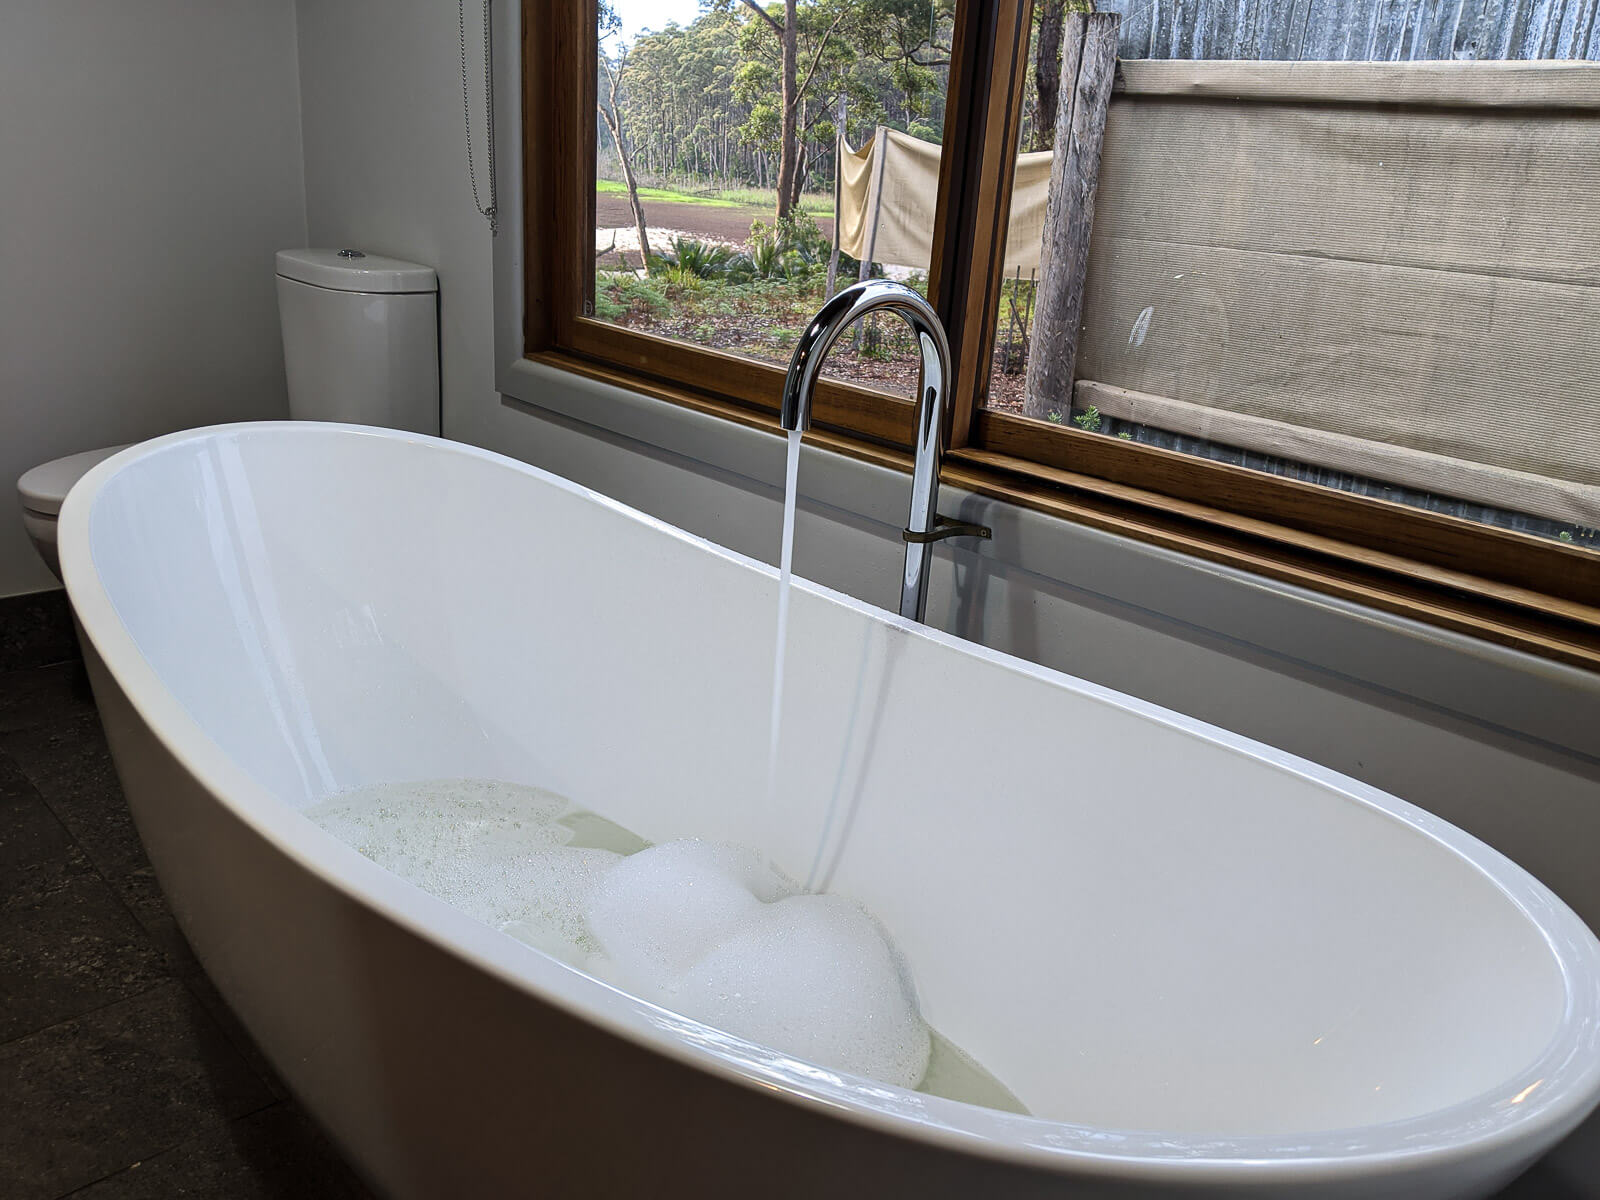 A large bath with a running tap and views outside of the window